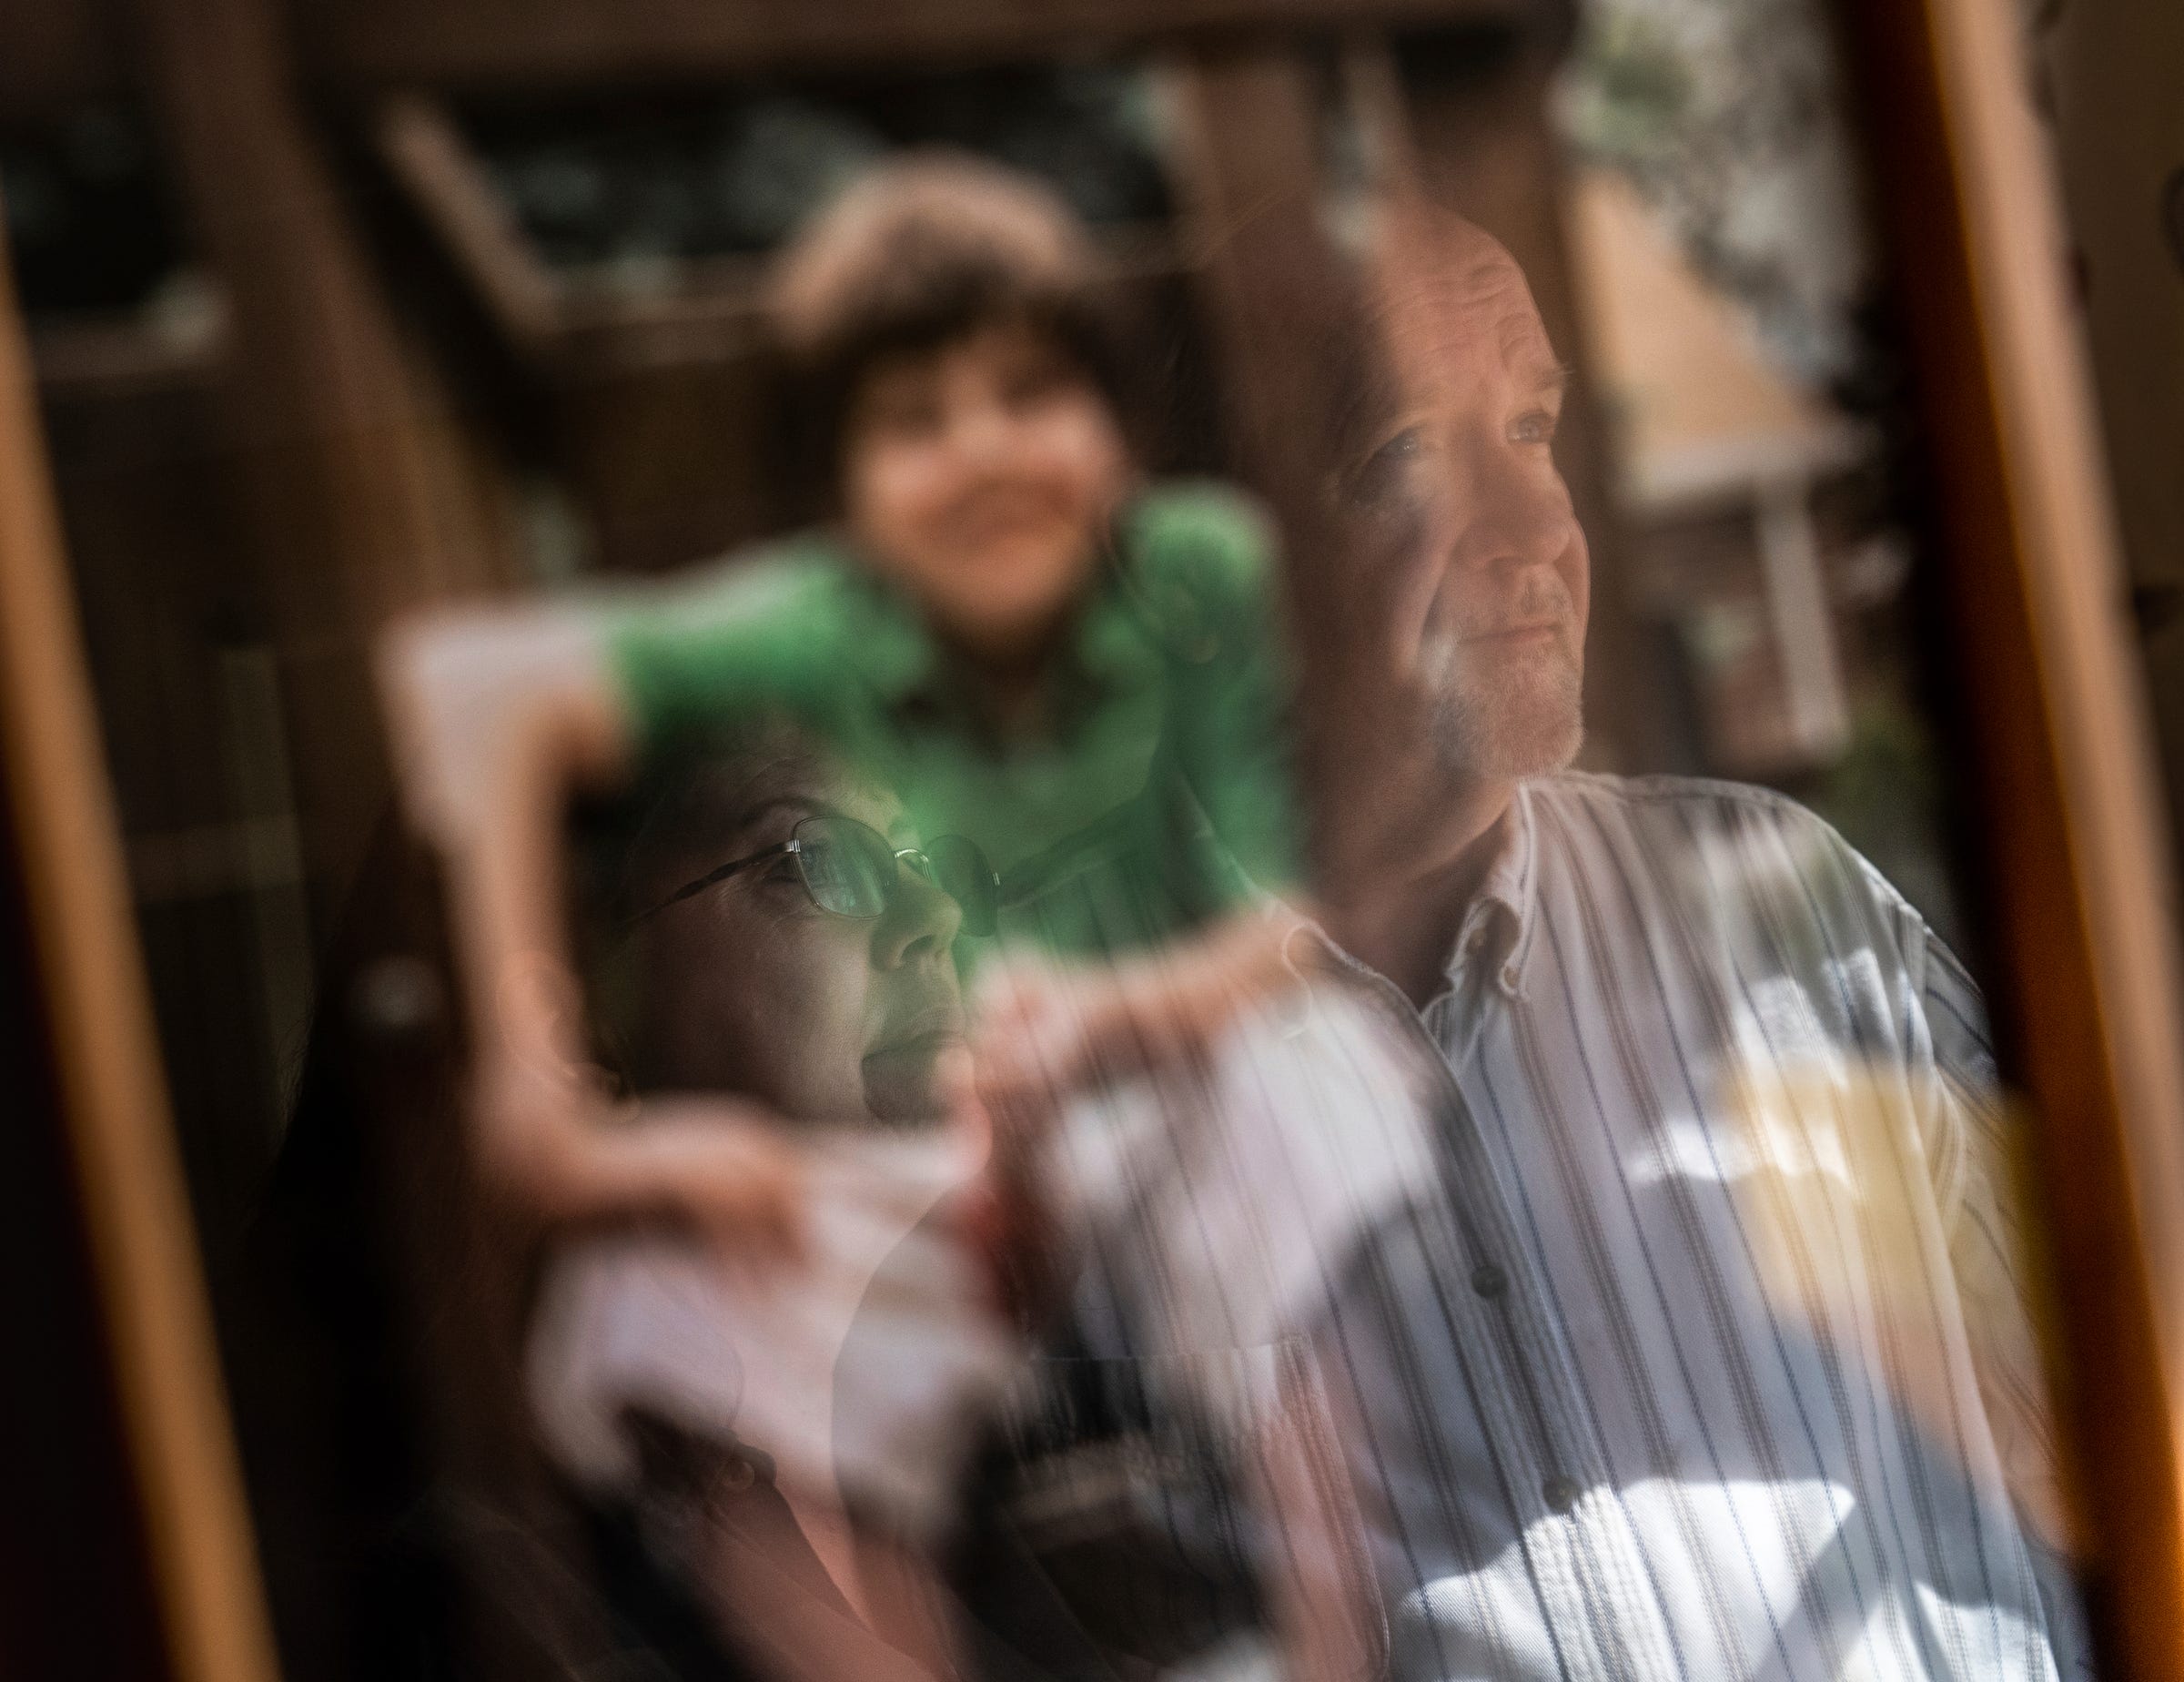 Cindy Berry and her husband, Doug, are seen reflected on an old photo of their son at their home on Wednesday, March 16, 2022. The Berrys say they don't understand why investigators in Wayne County failed to conclude that their son, who has autism, had been at grave risk in a vocational day program.